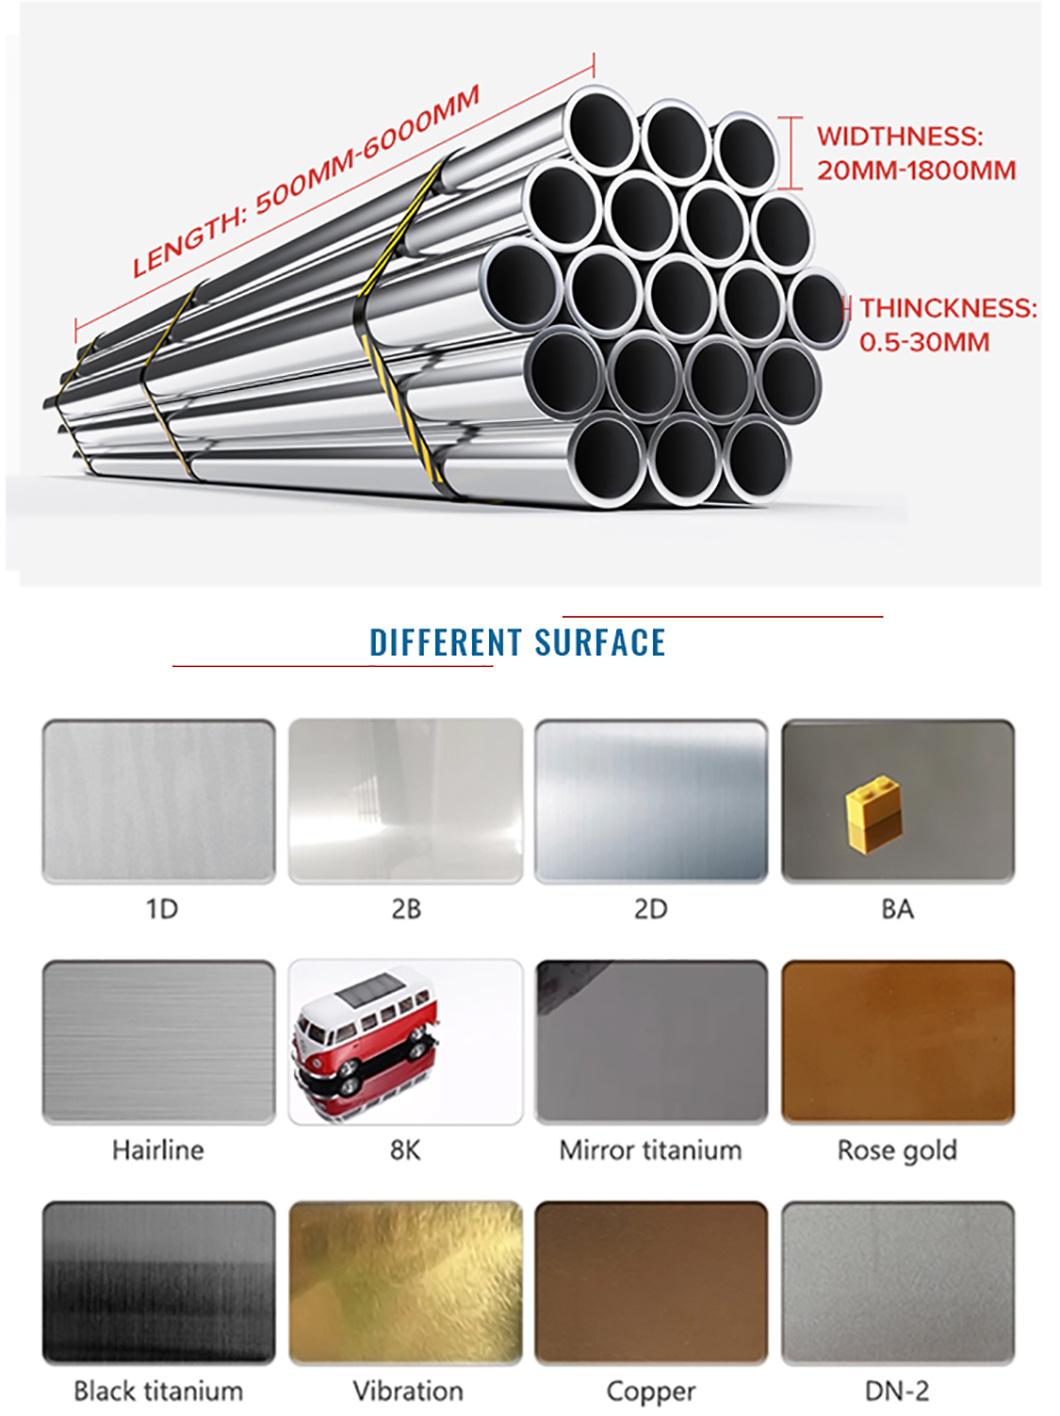 Seamless ASTM A269 A240 A213 Tp316 316L Stainless Steel Pipe